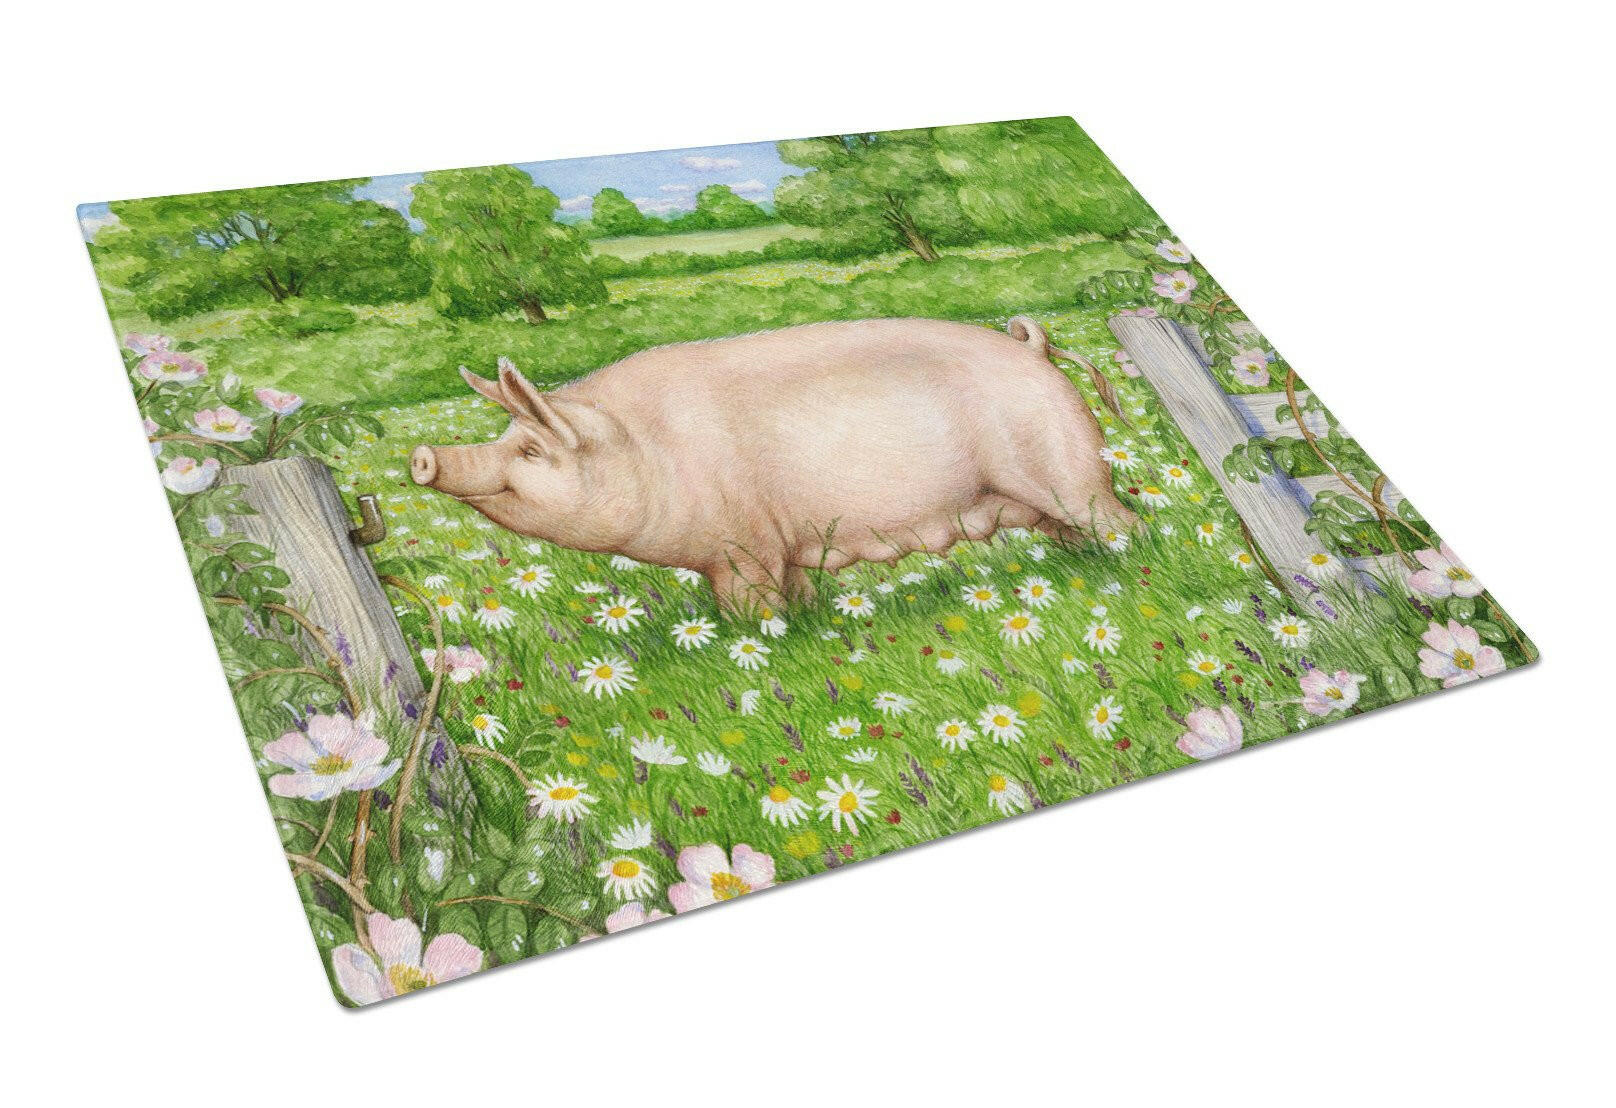 Pig In Dasies by Debbie Cook Glass Cutting Board Large CDCO0374LCB by Caroline's Treasures